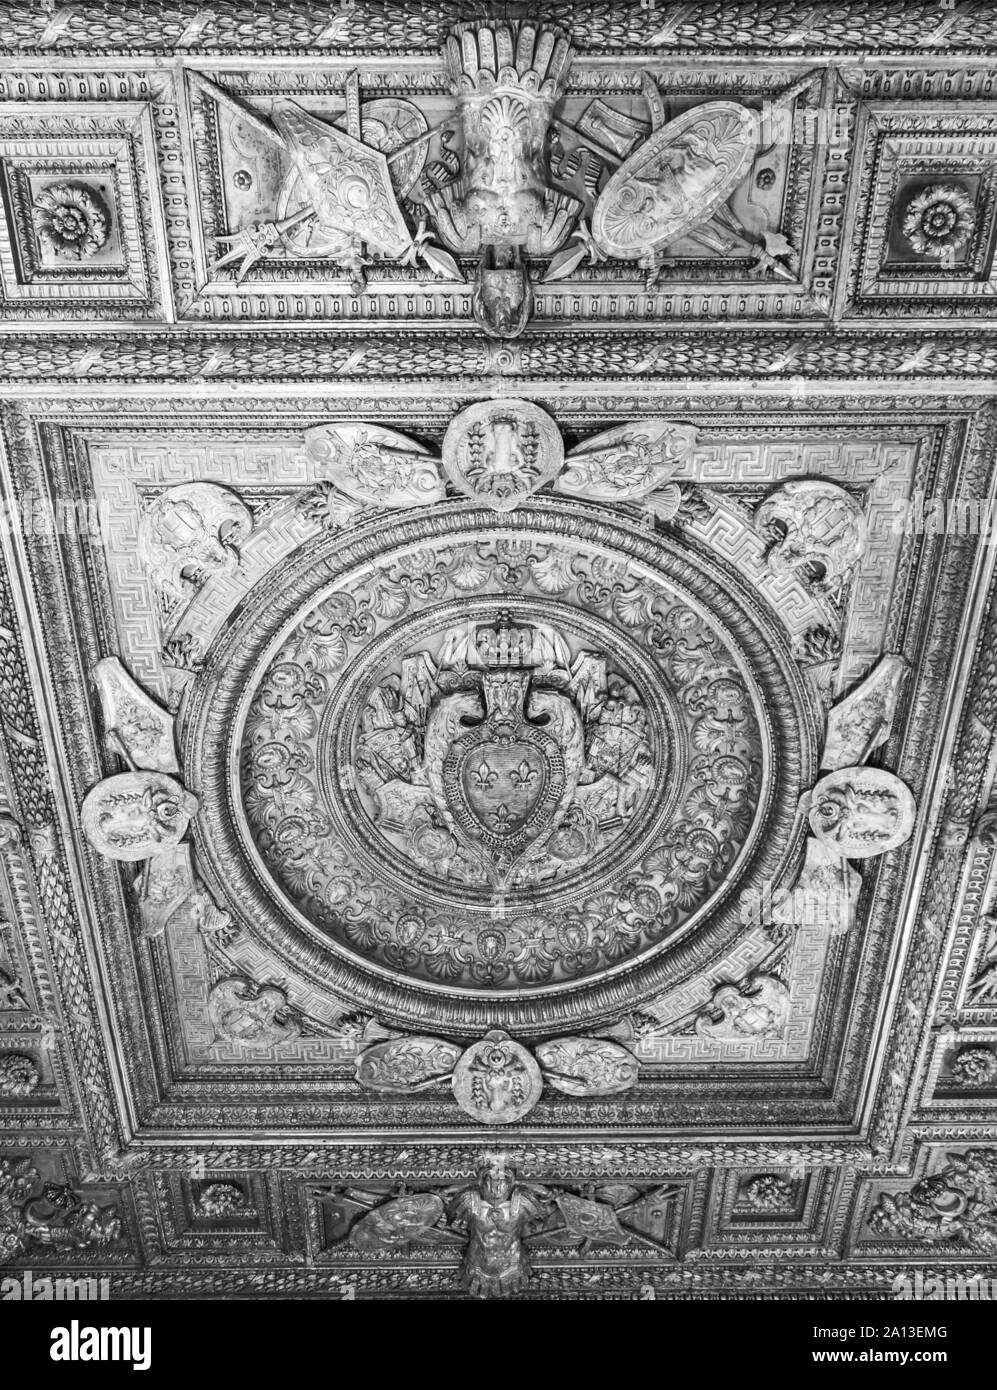 FRANCE, PARIS - MAY 16, 2016: A carved ceiling in one of the halls of the Louvre. Paris. France. Stock Photo